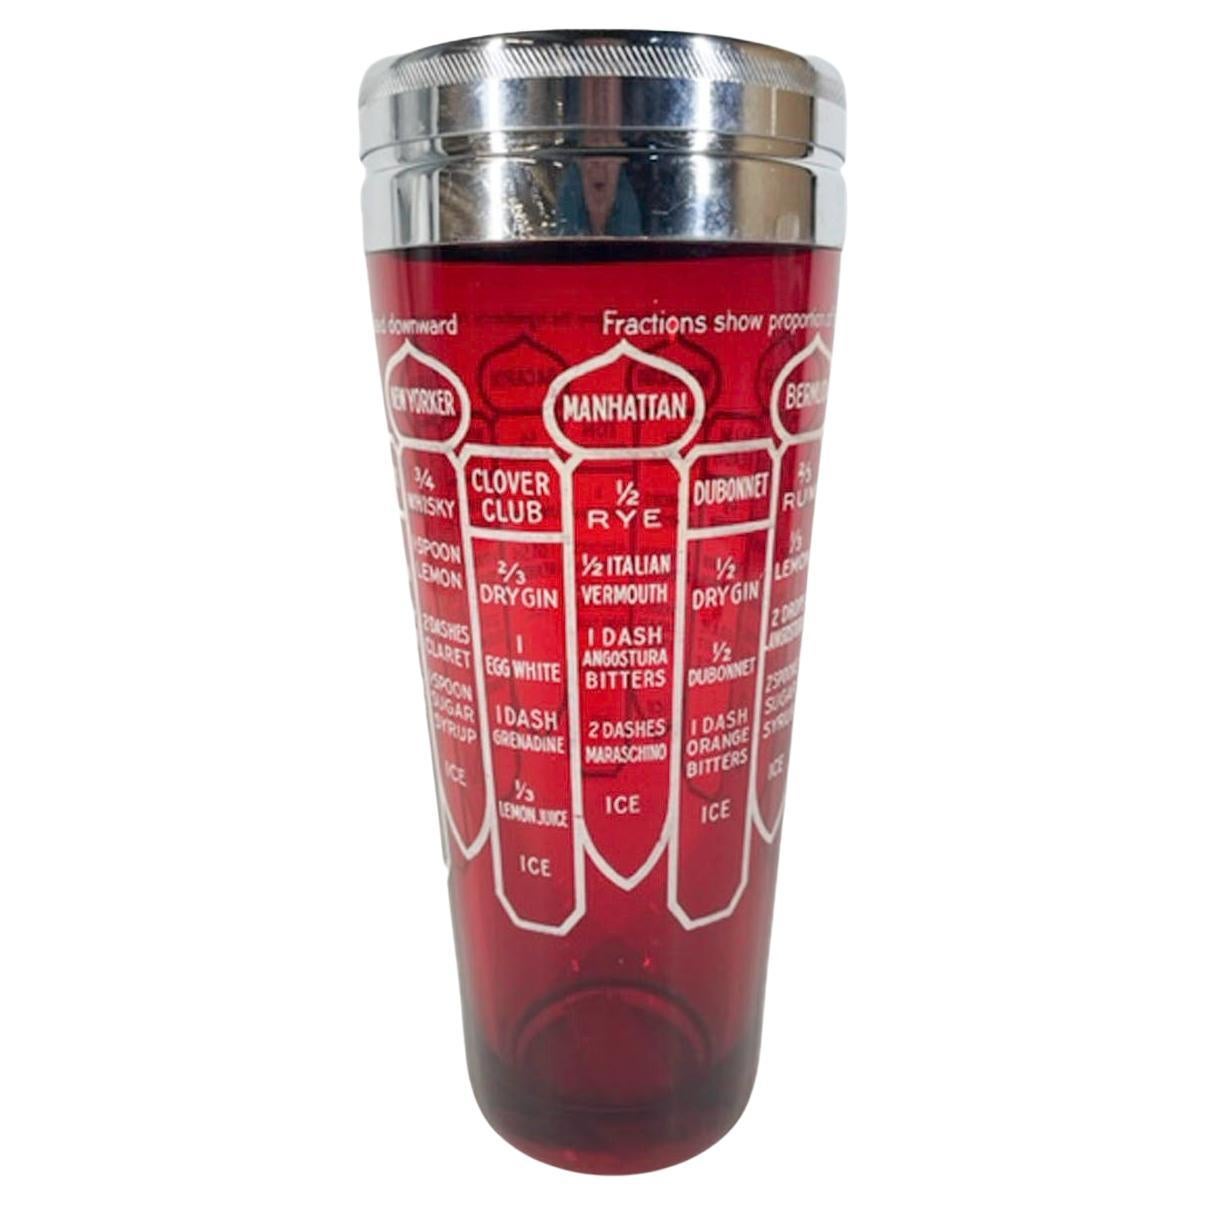 Art Deco Ruby Glass Cocktail Shaker with 14 Recipes in White Text and Graphics